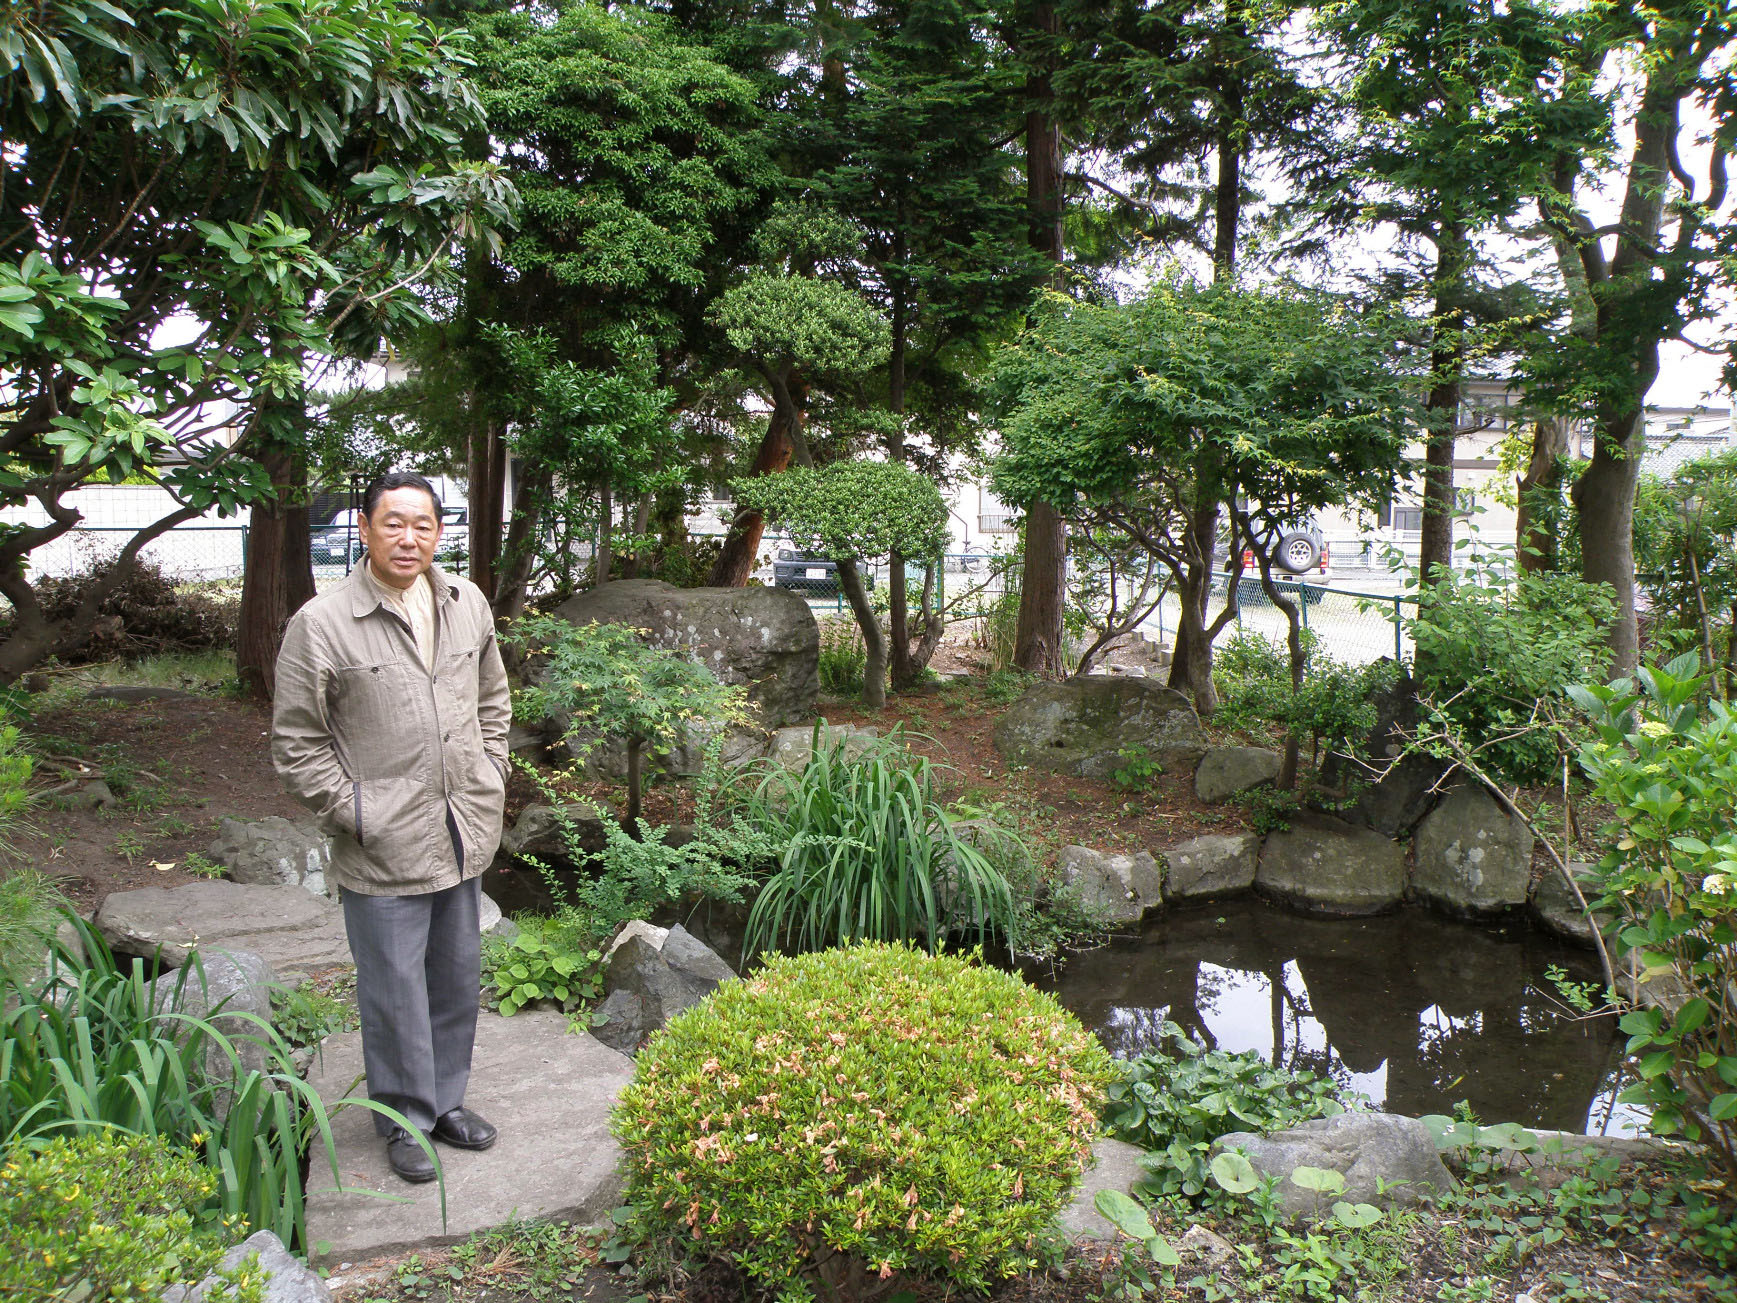 Falsely accused: Yoshiyuki Kono stands in the yard of his home in June 2009. | KYODO